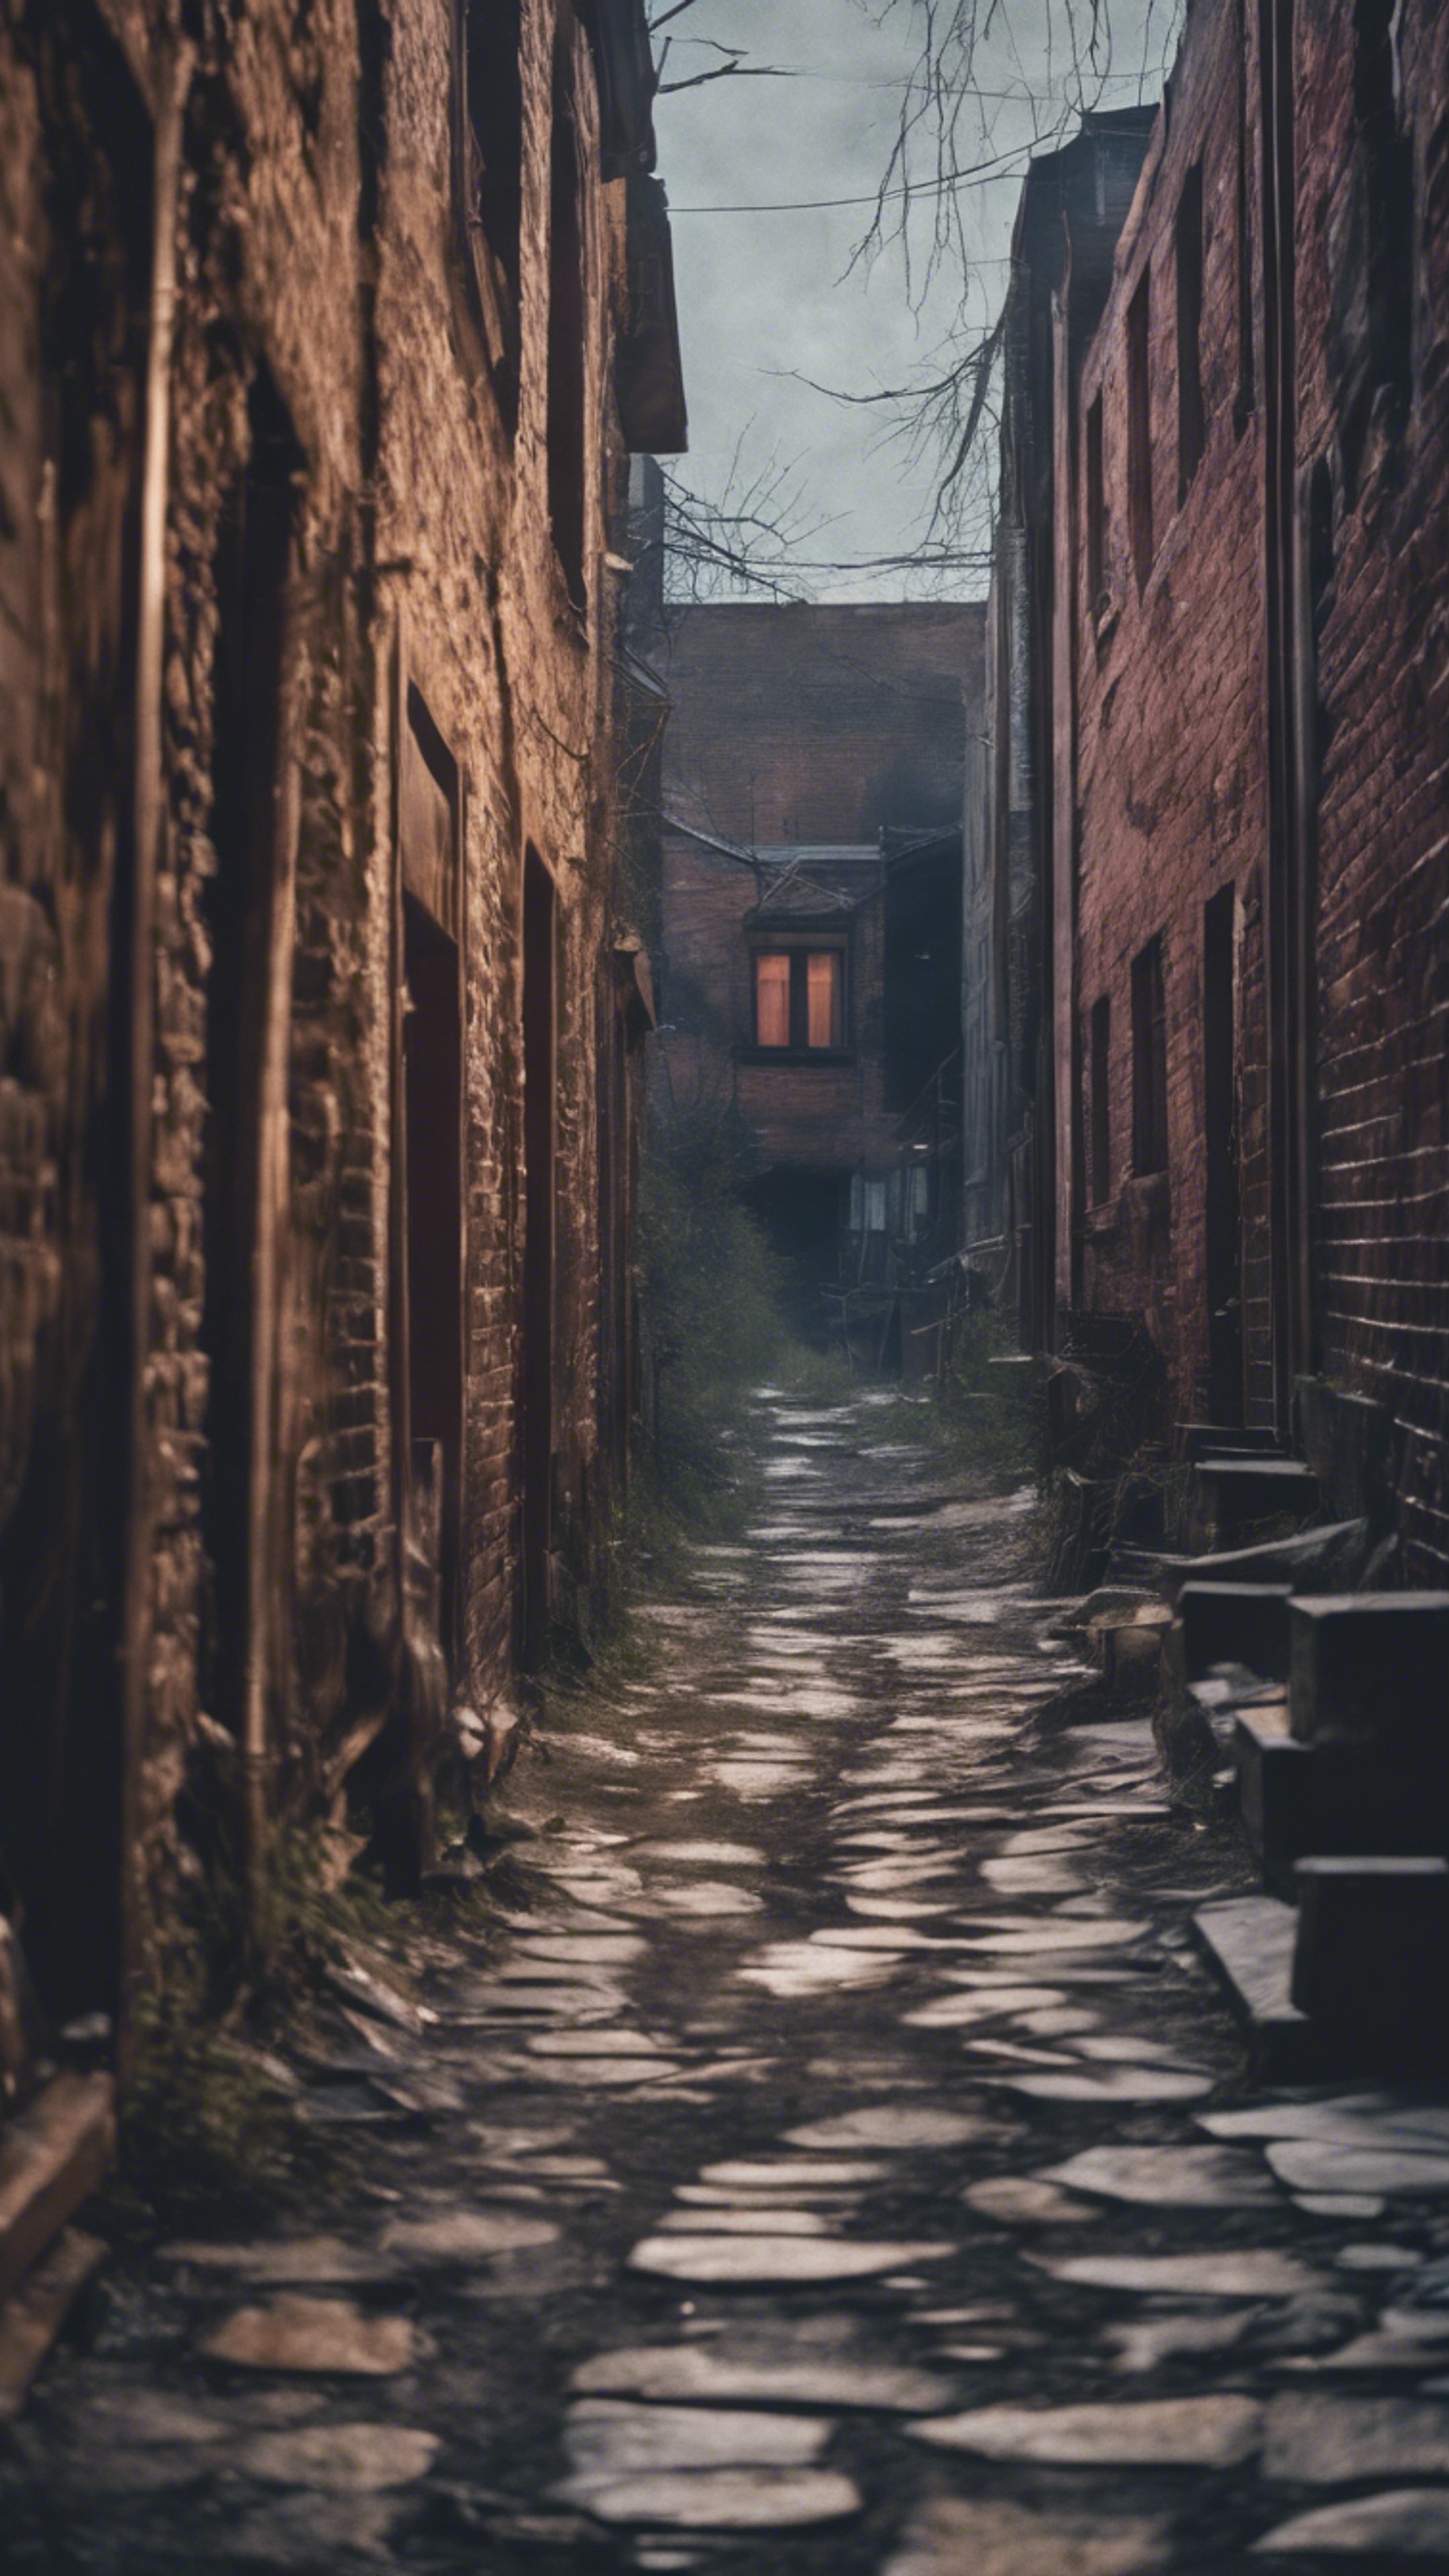 A haunted alleyway in a ghost town with spectral figures floating around. Tapeet[5b53dba013a8448c806a]